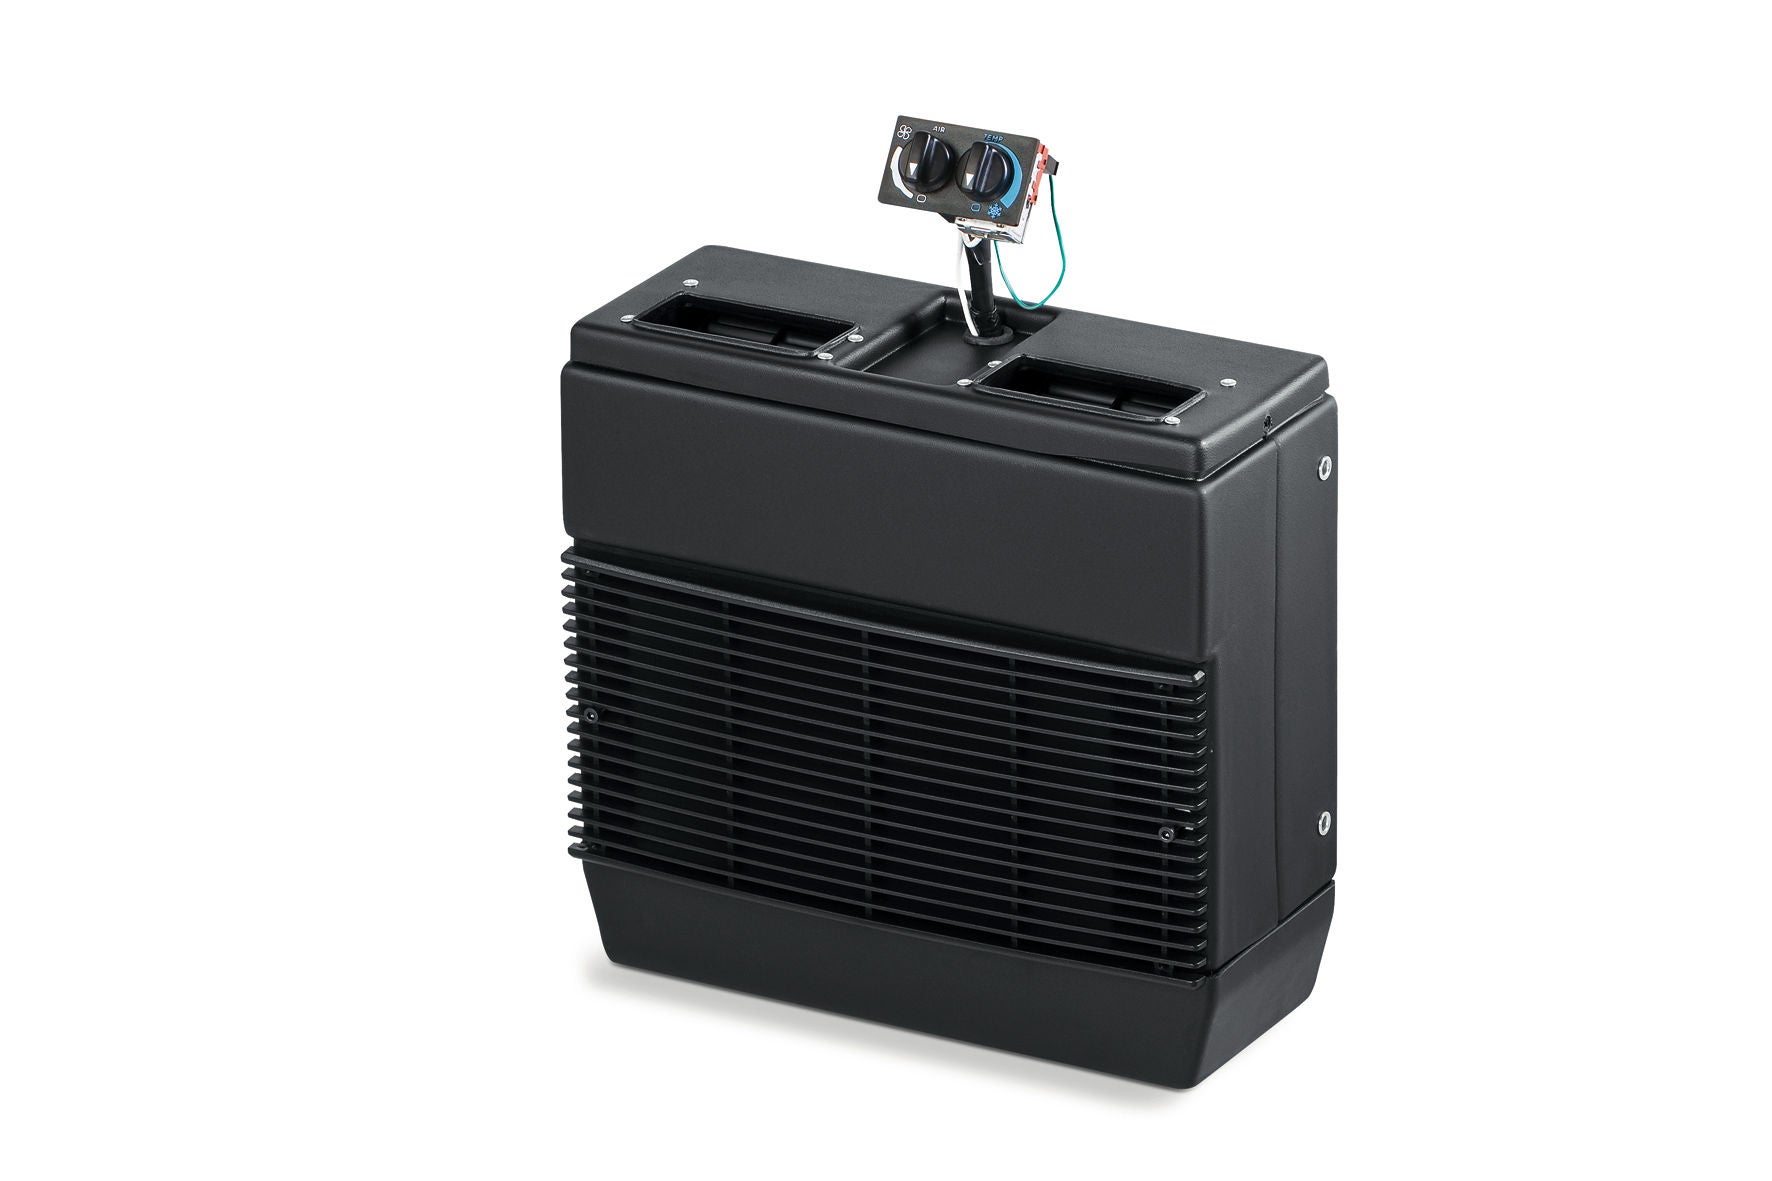 Product picture of Webasto integrated air-conditioning system model Montreal